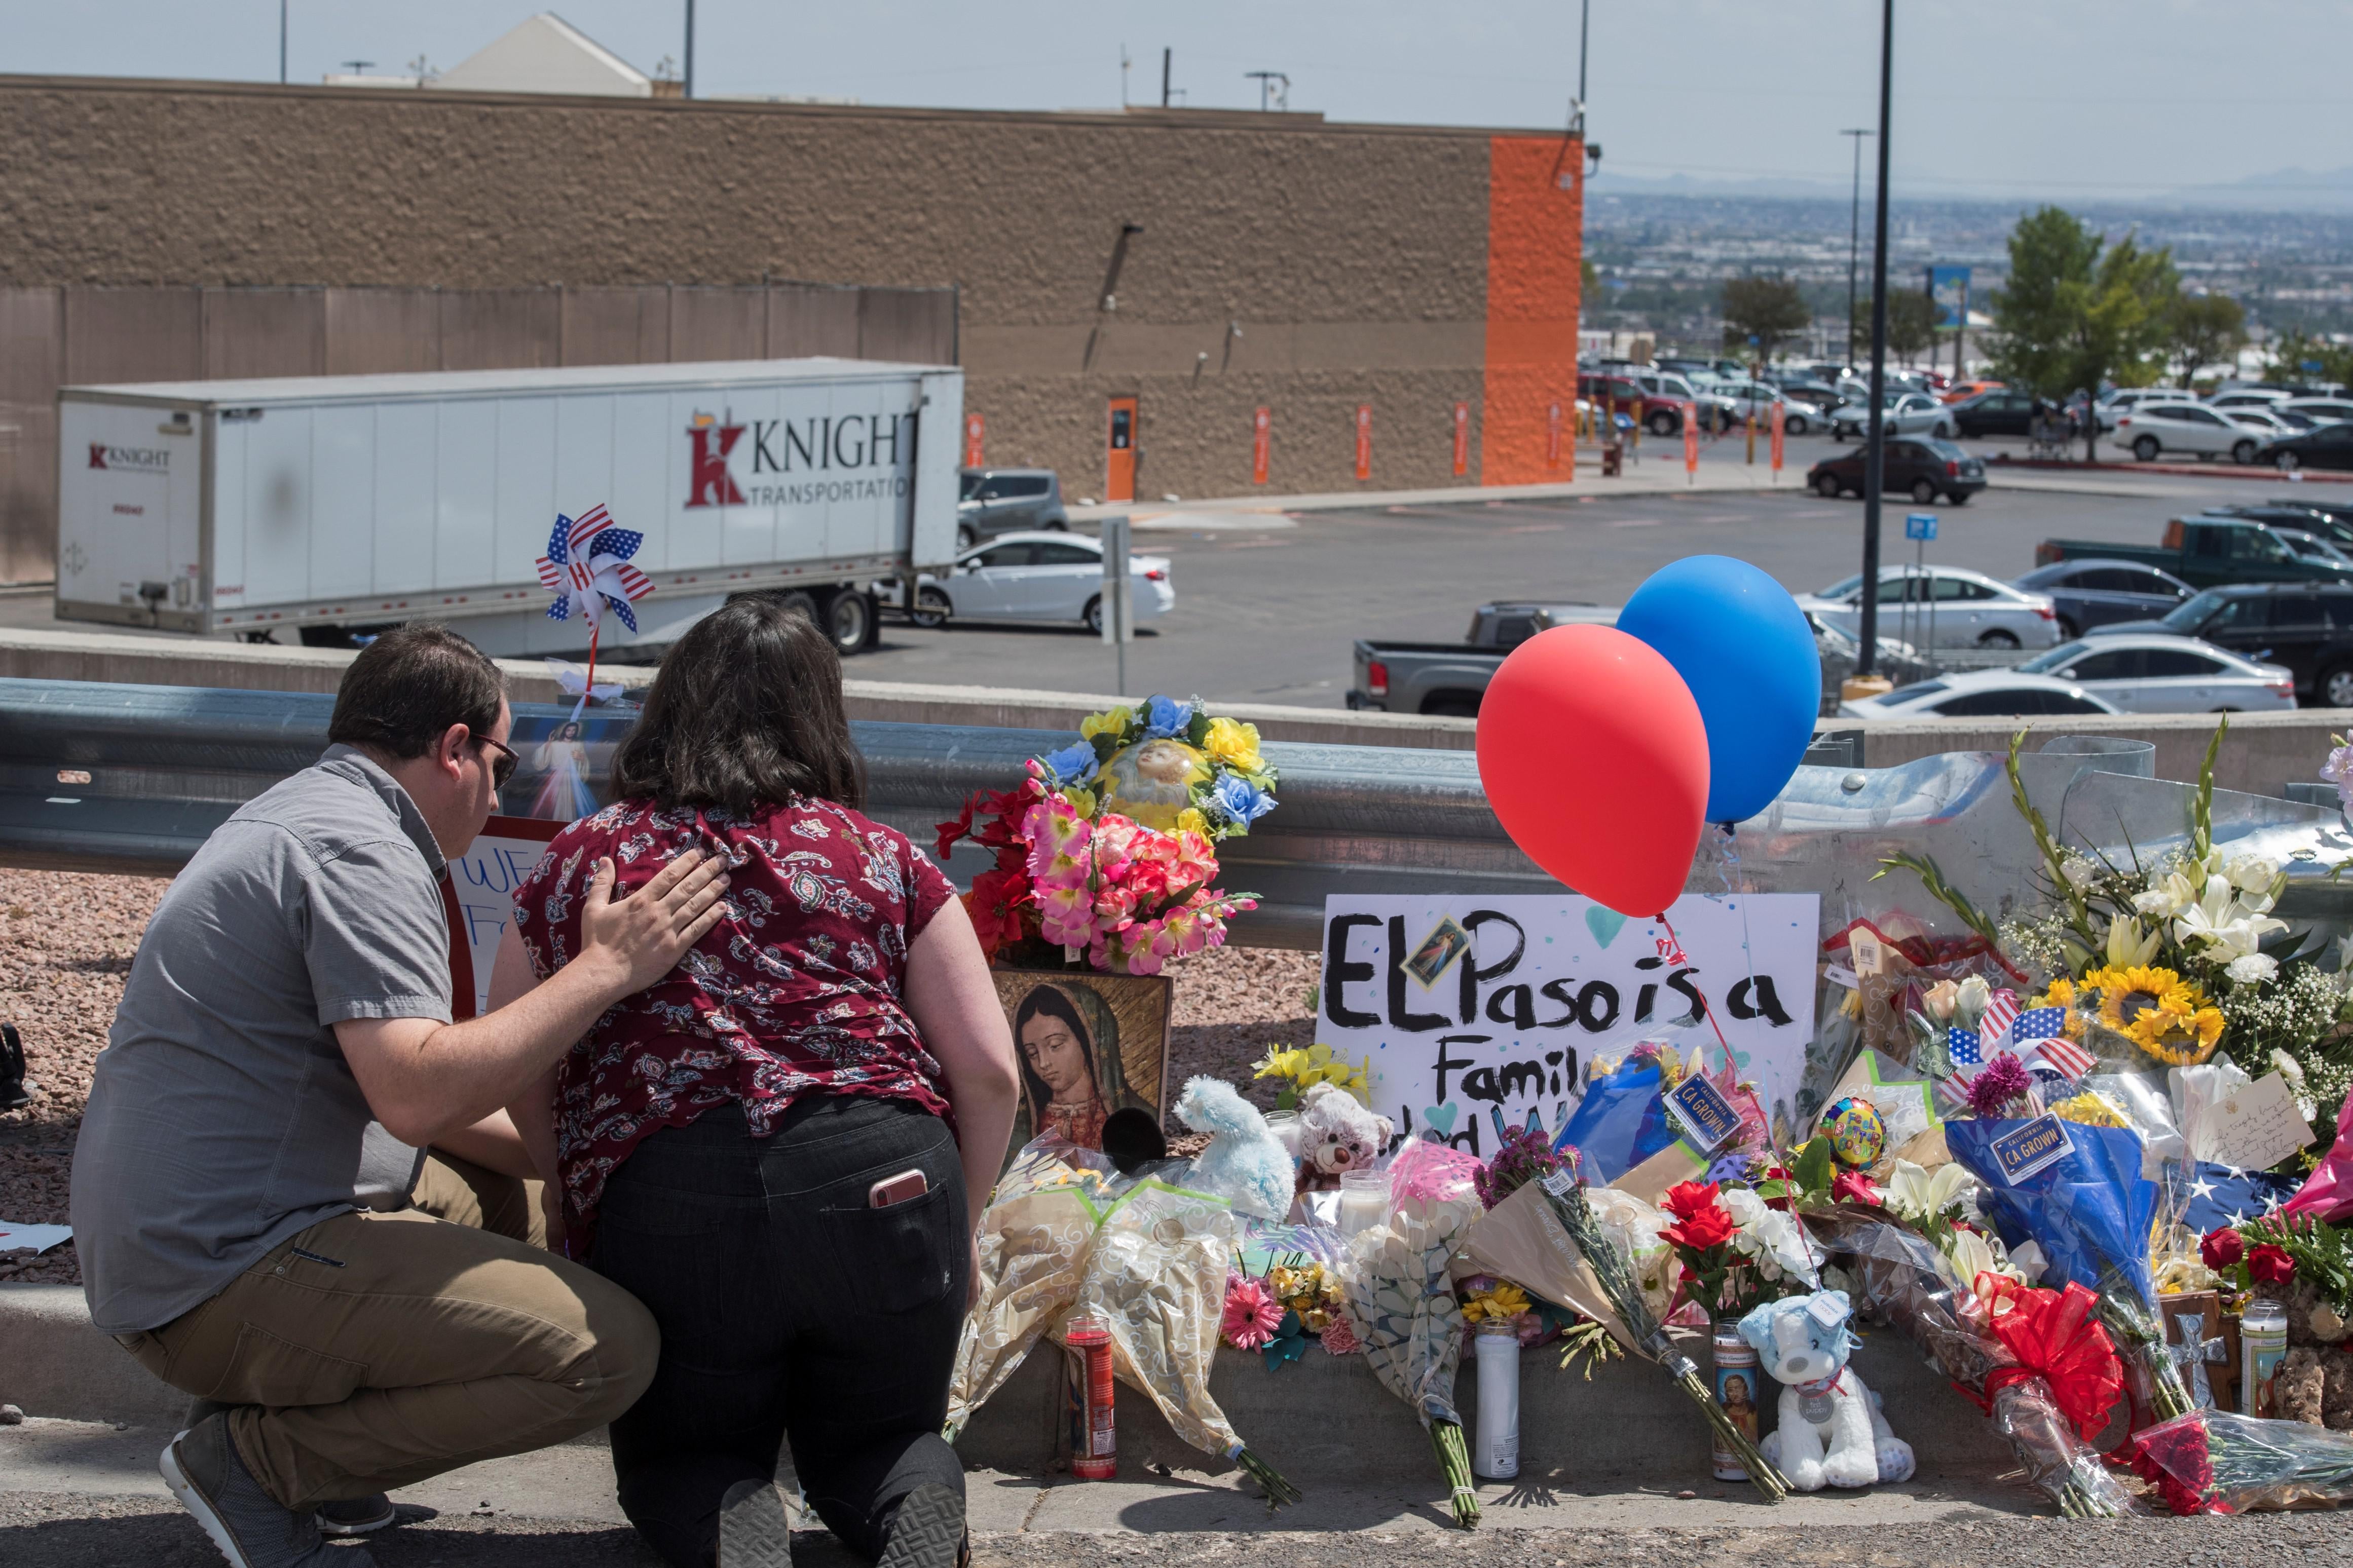 Two people kneel beside a memorial of flowers, balloons, and religious items honoring the victims of the shooting. A sign says "El Paso is a family."